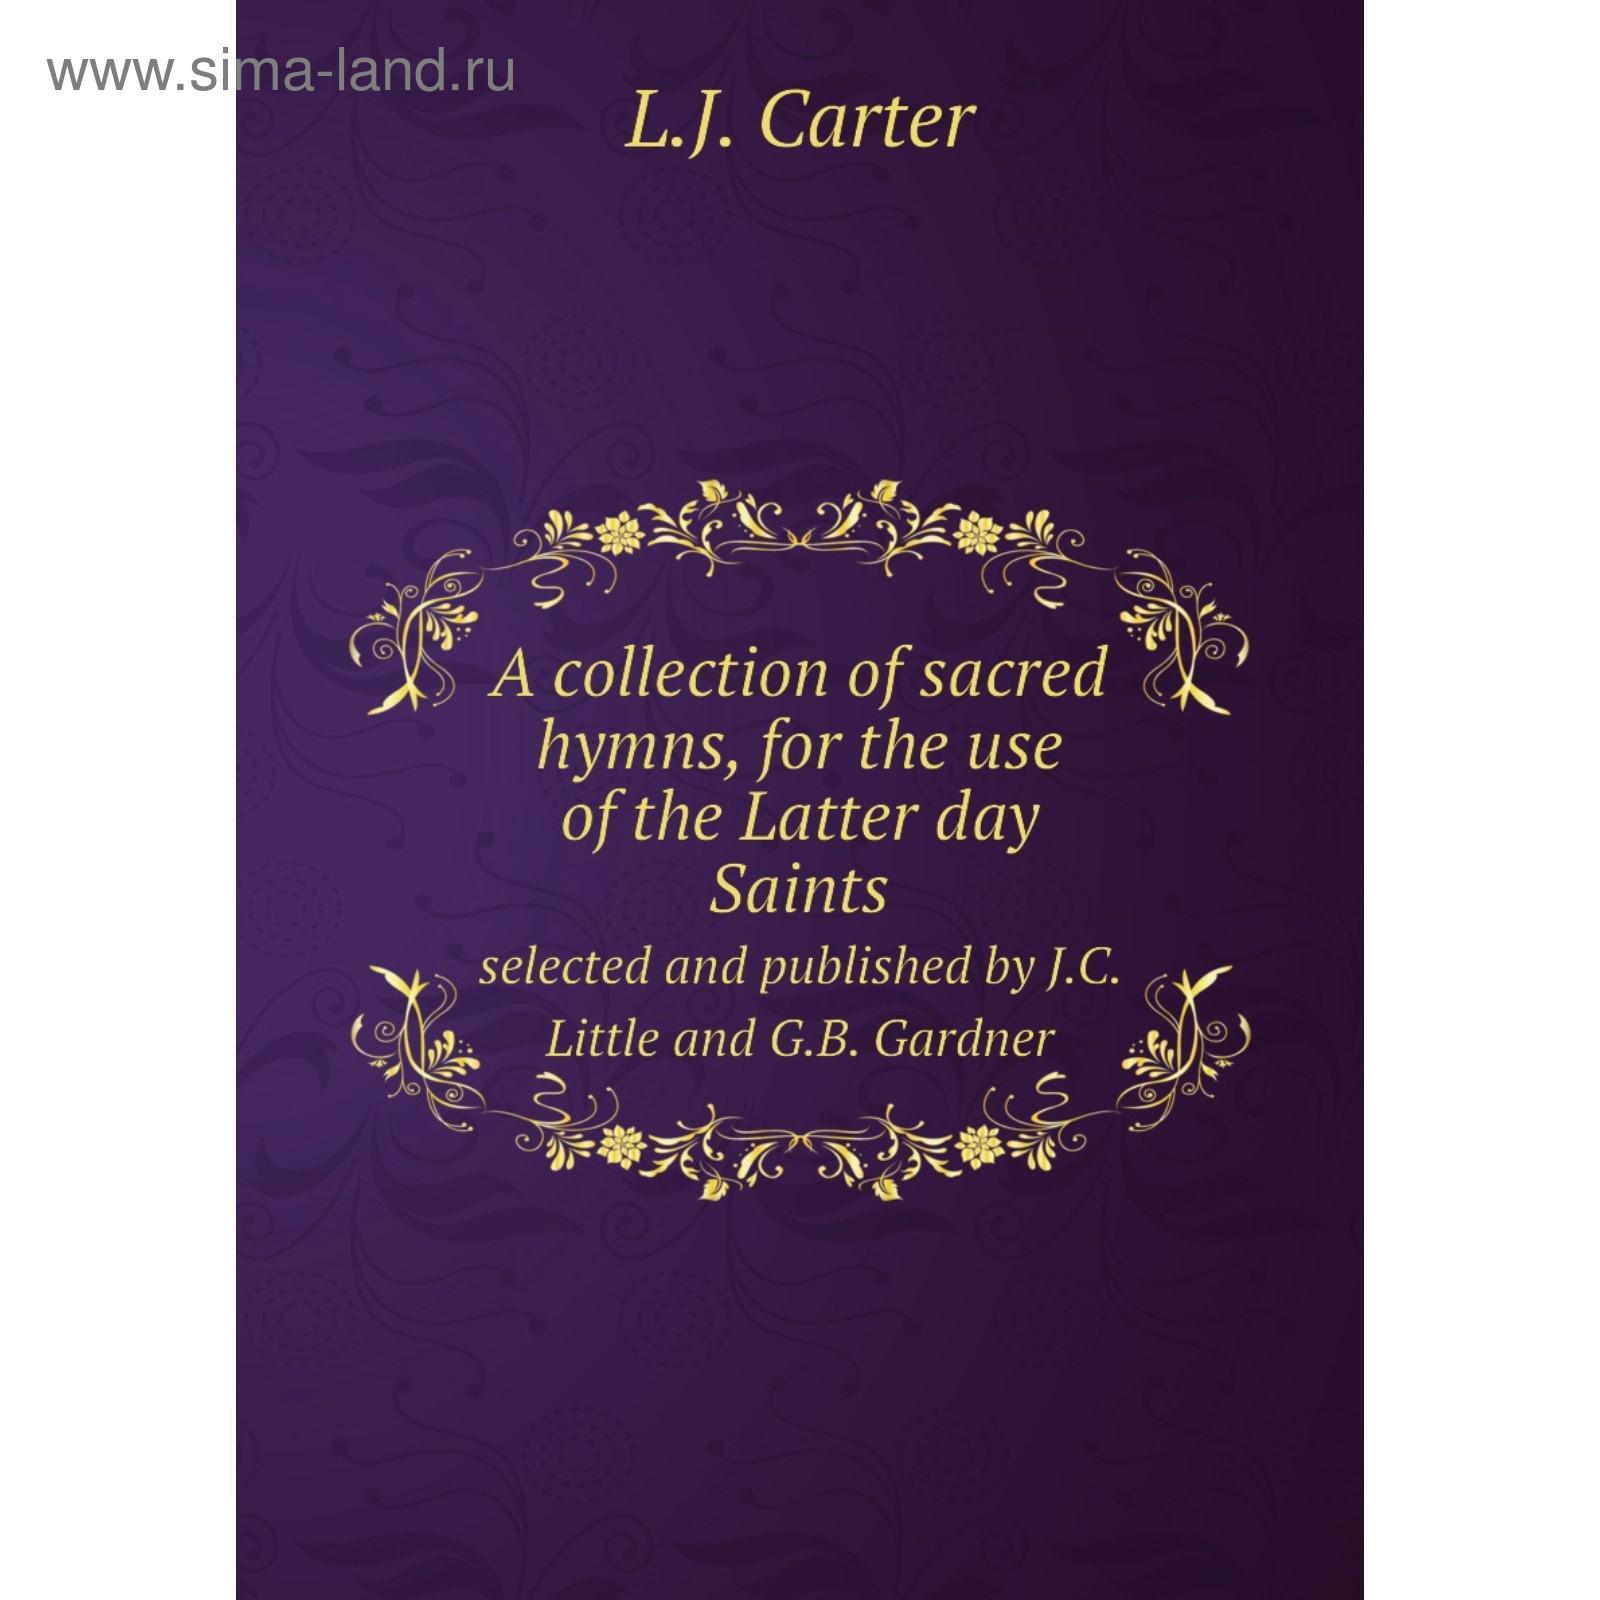 A Collection Of Sacred Hymns For The Use Of The Latter Day Saints Selected And Published By J C Little And G B Gardner L J Carter Kupit Po Cene Ot 845 00 Rub